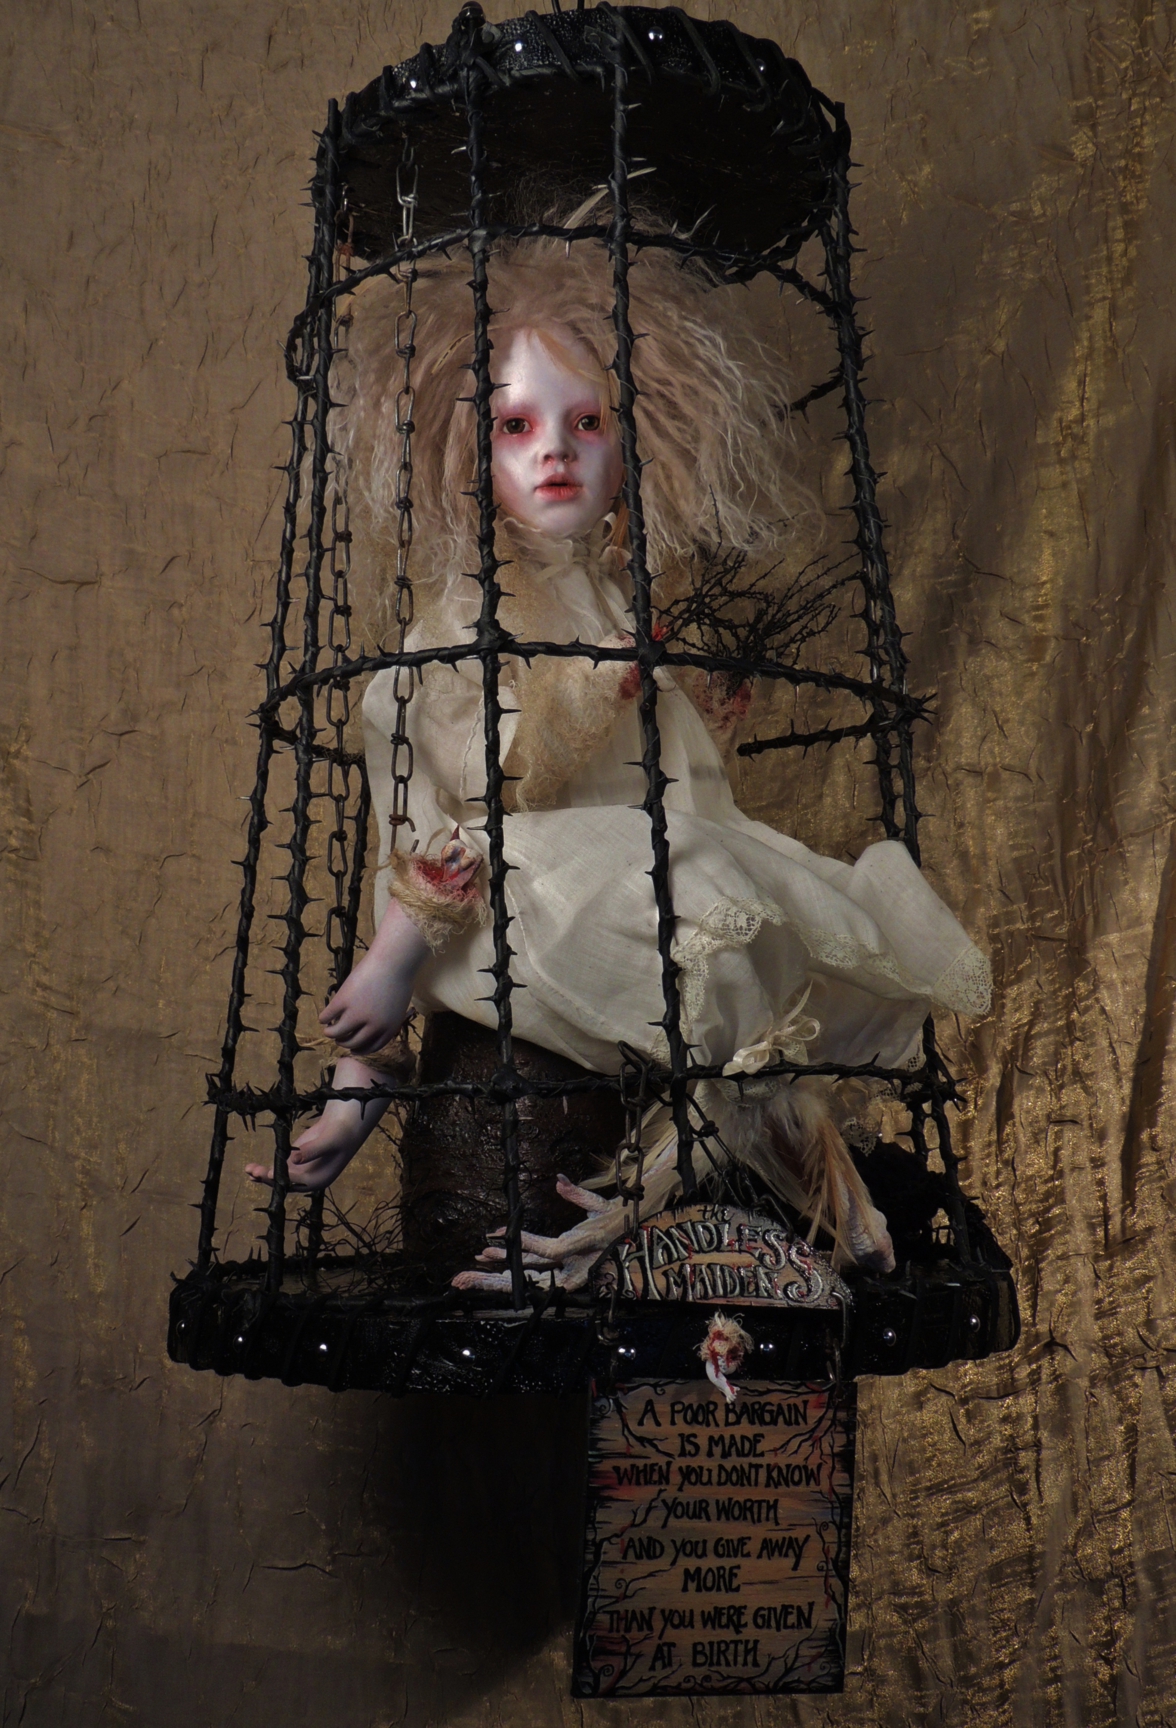 mixed media artdoll assemblage of a blonde caged damsel doll in a white gown with severed hands inspired by the Grimm fairytale